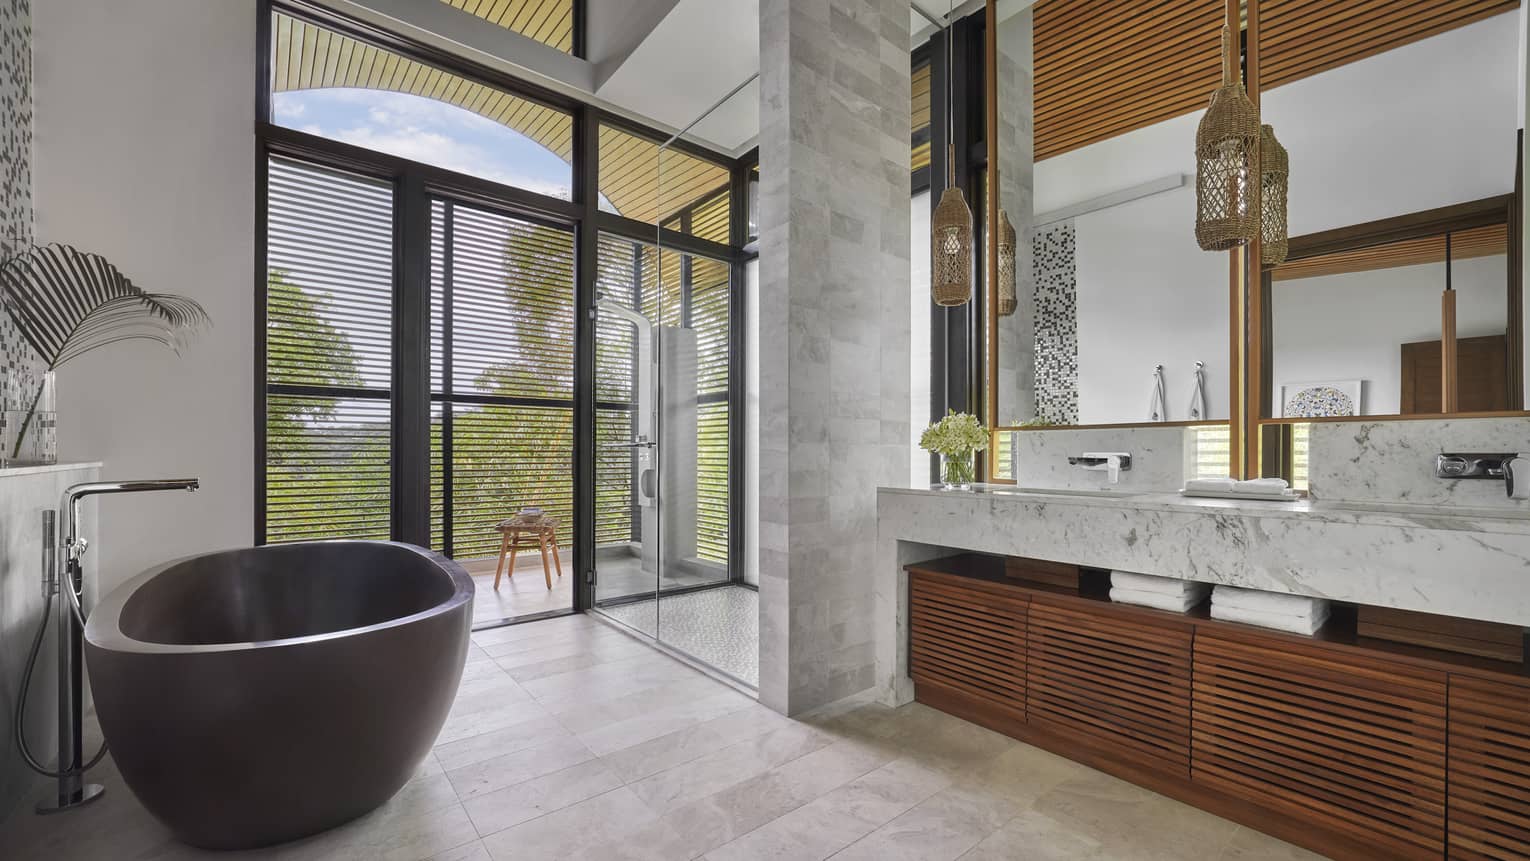 Bathroom with black standalone tub, marble and wood vanity, entrance to the outdoors